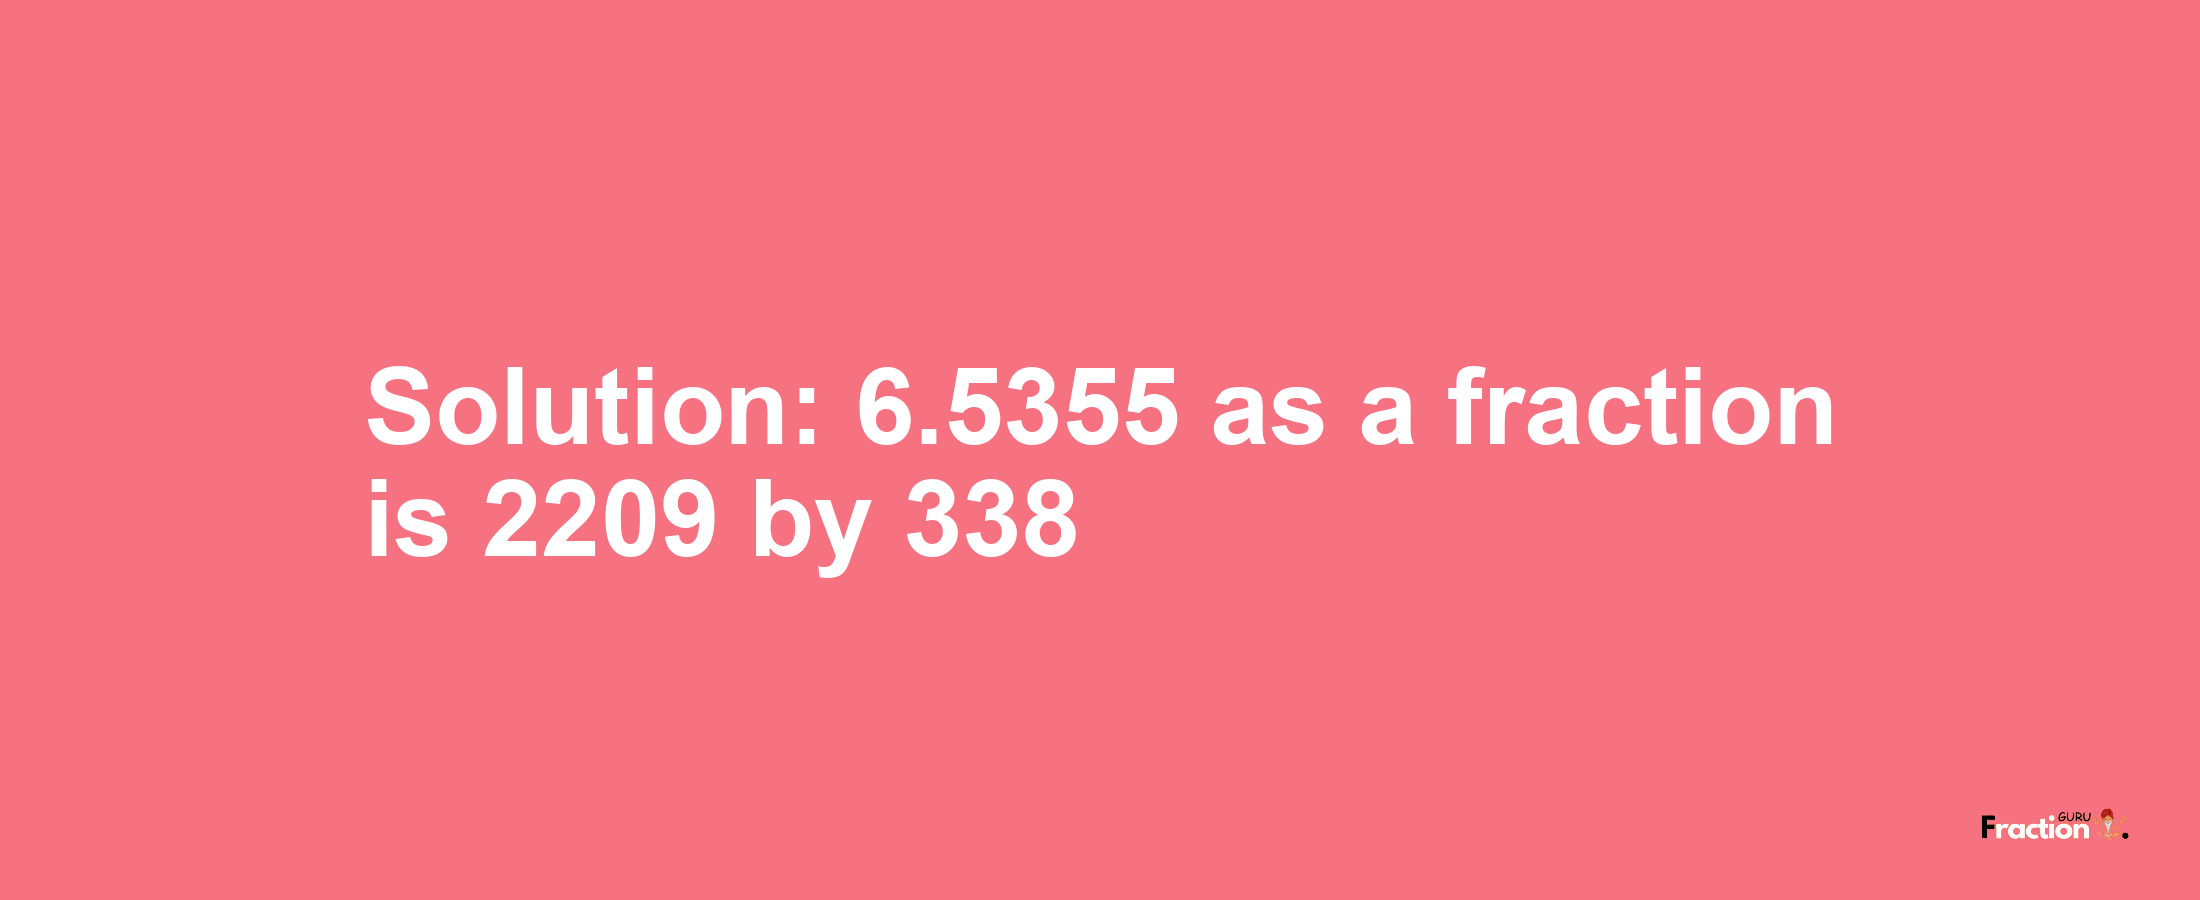 Solution:6.5355 as a fraction is 2209/338